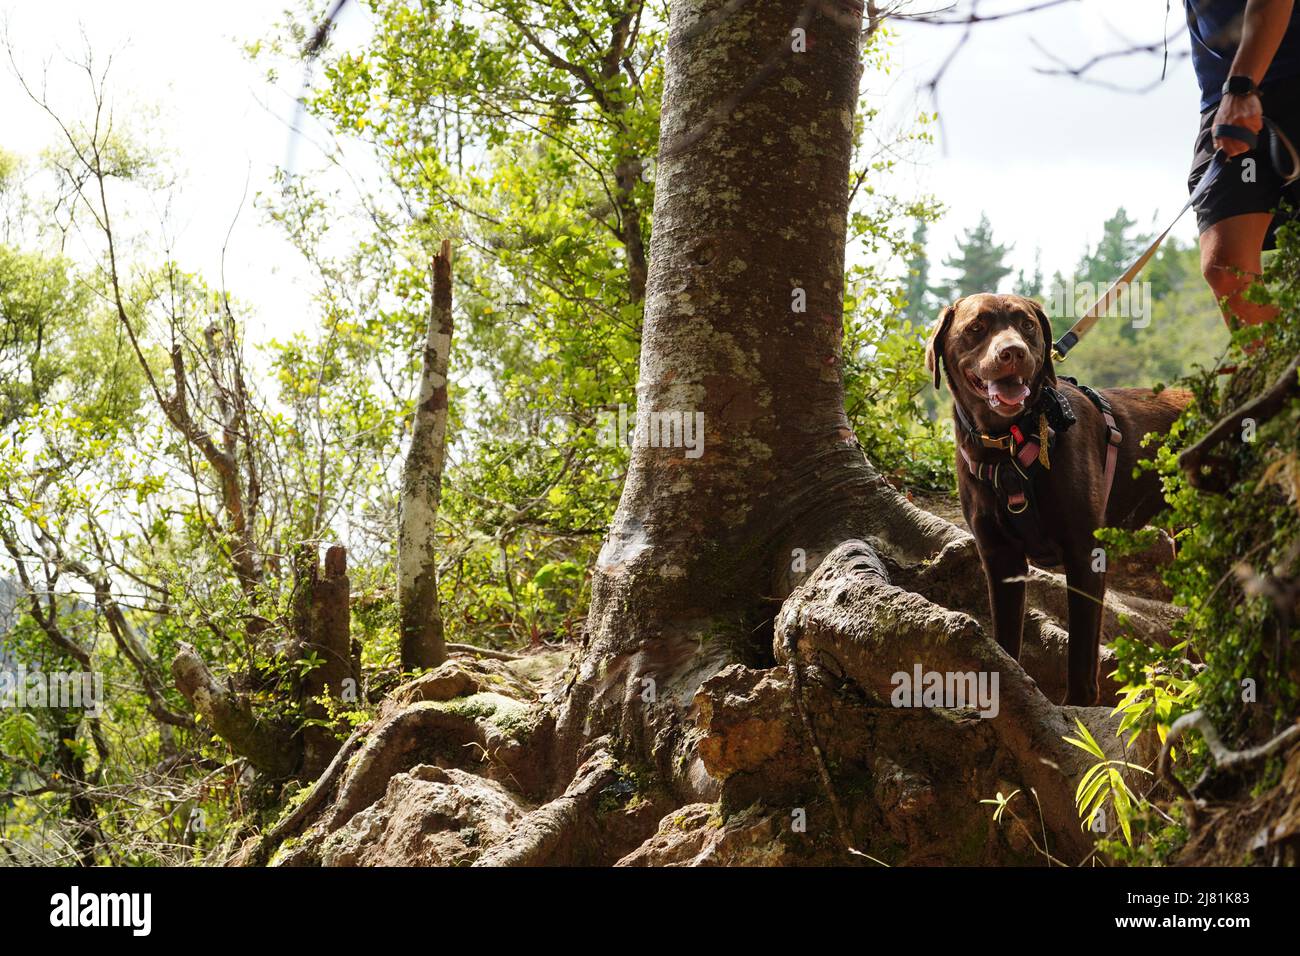 A chocolate labrador dog walking on a leash on a forest hike Stock Photo